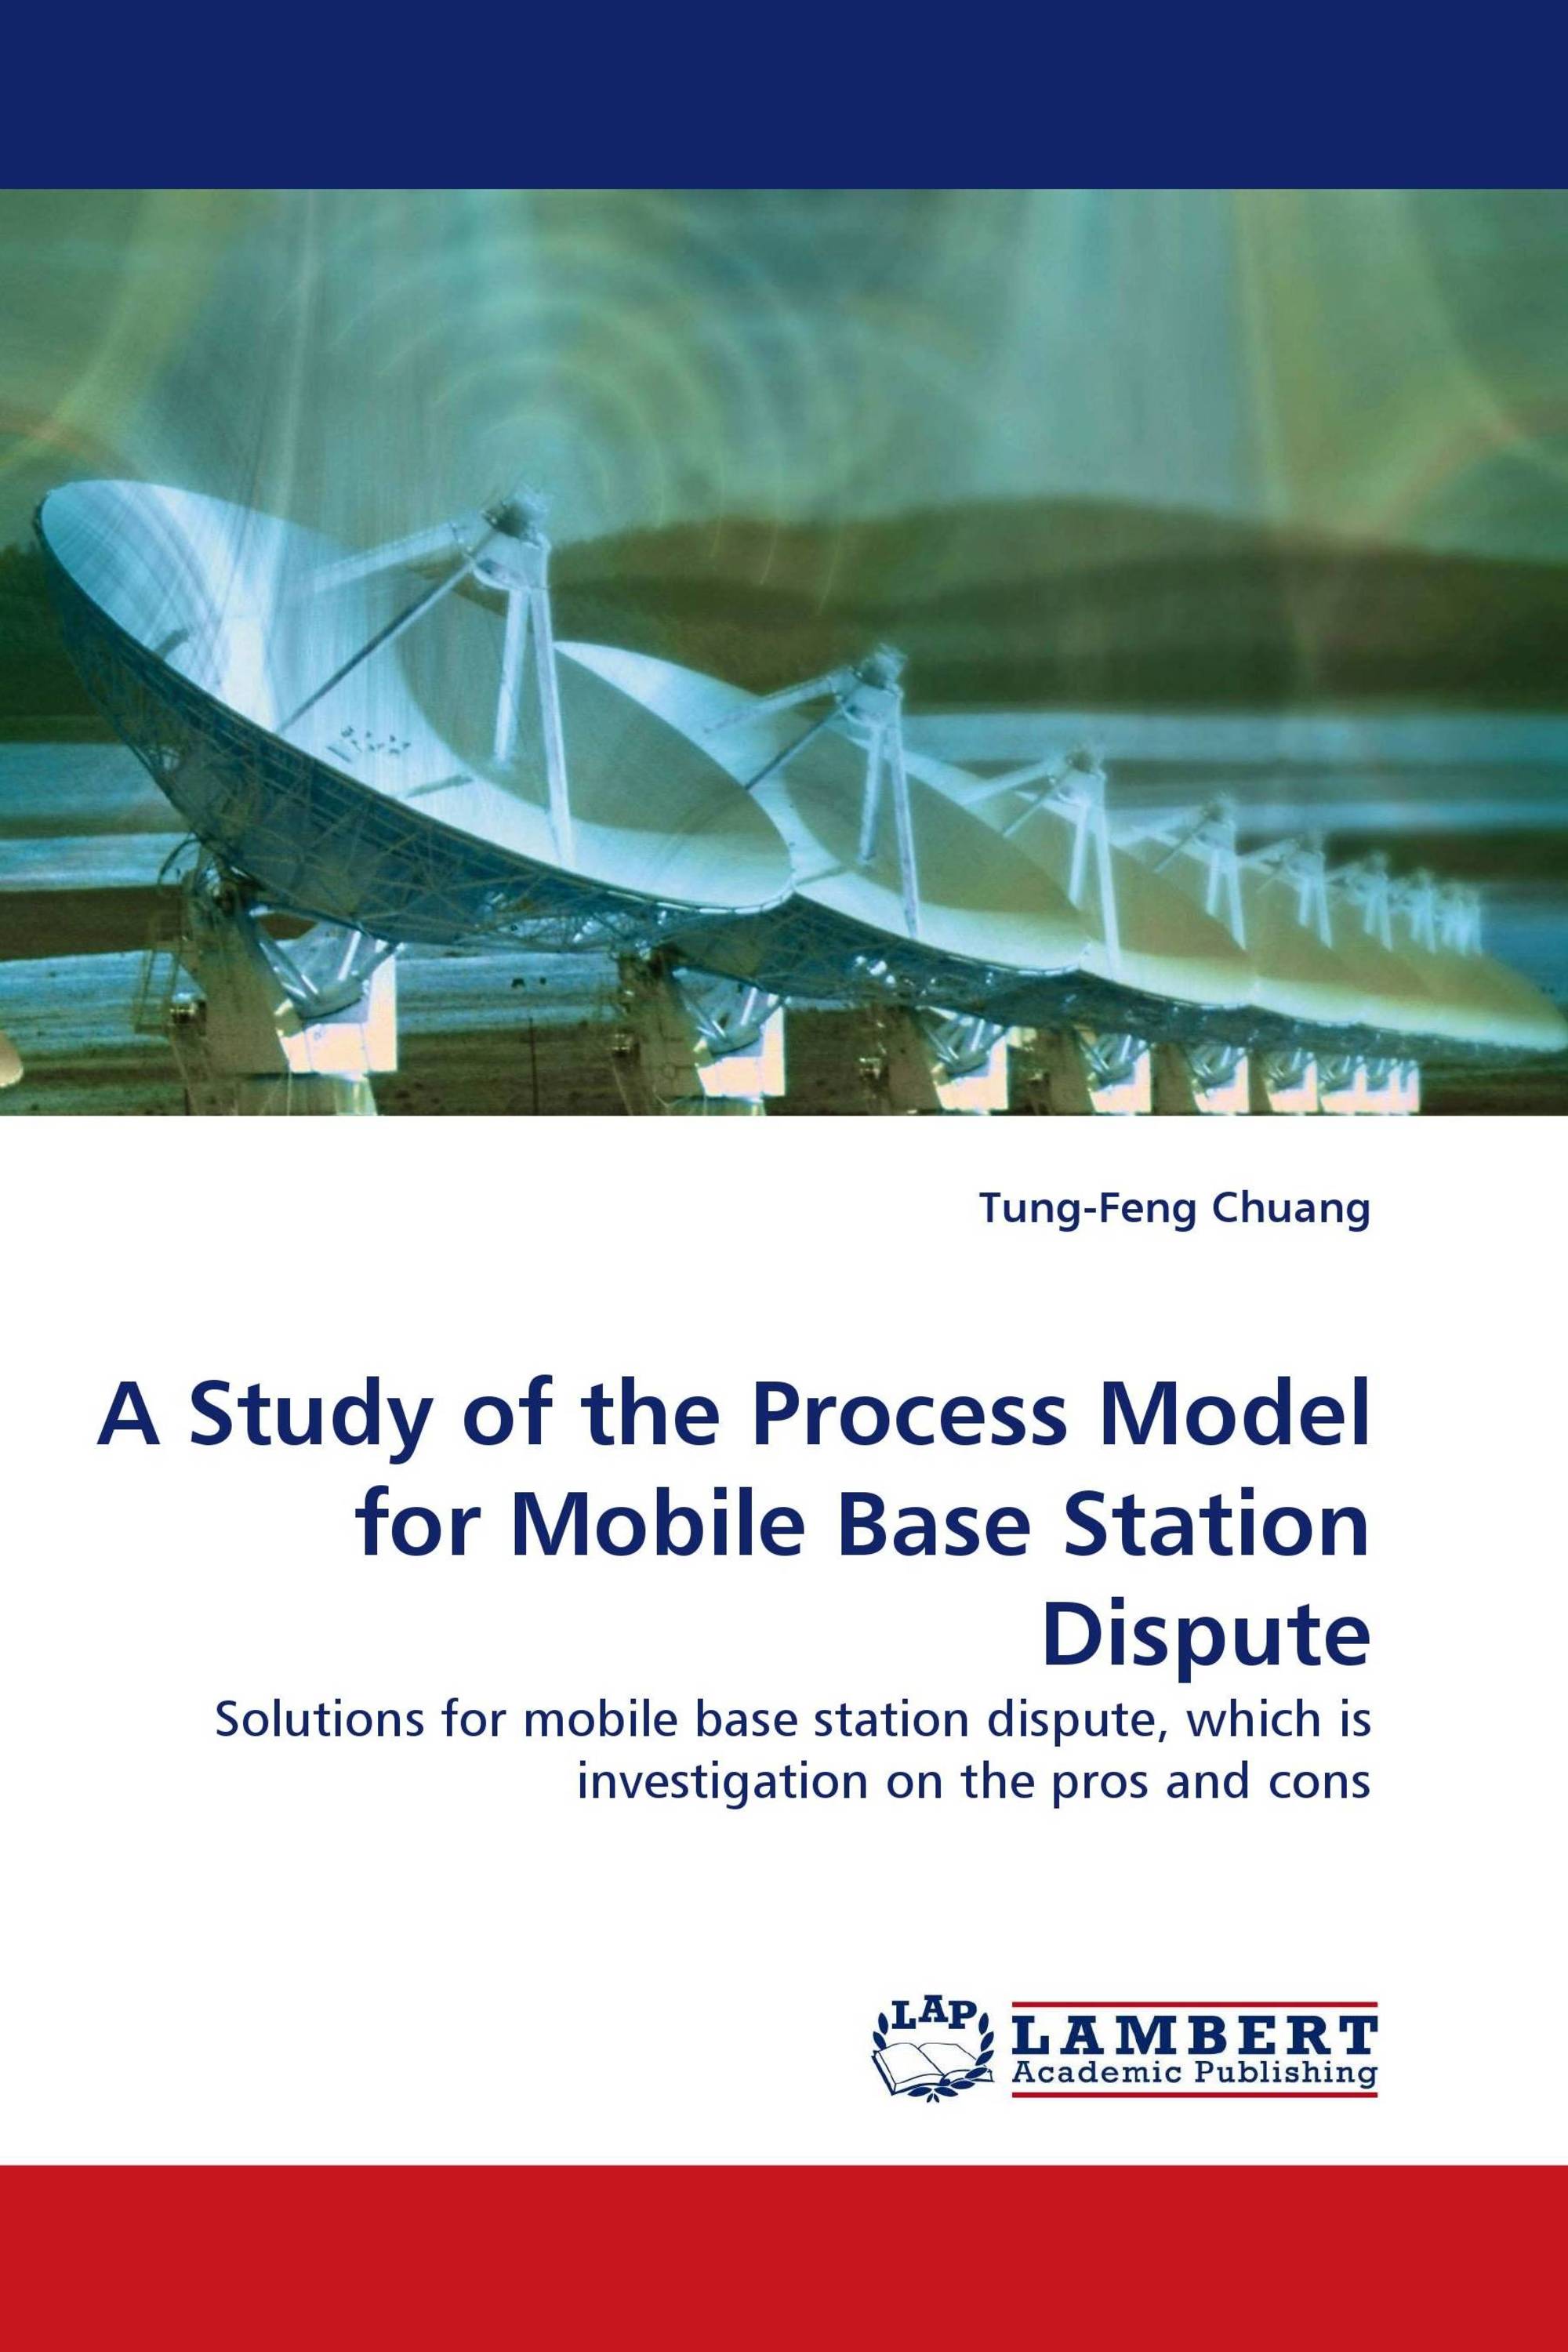 A Study of the Process Model for Mobile Base Station Dispute